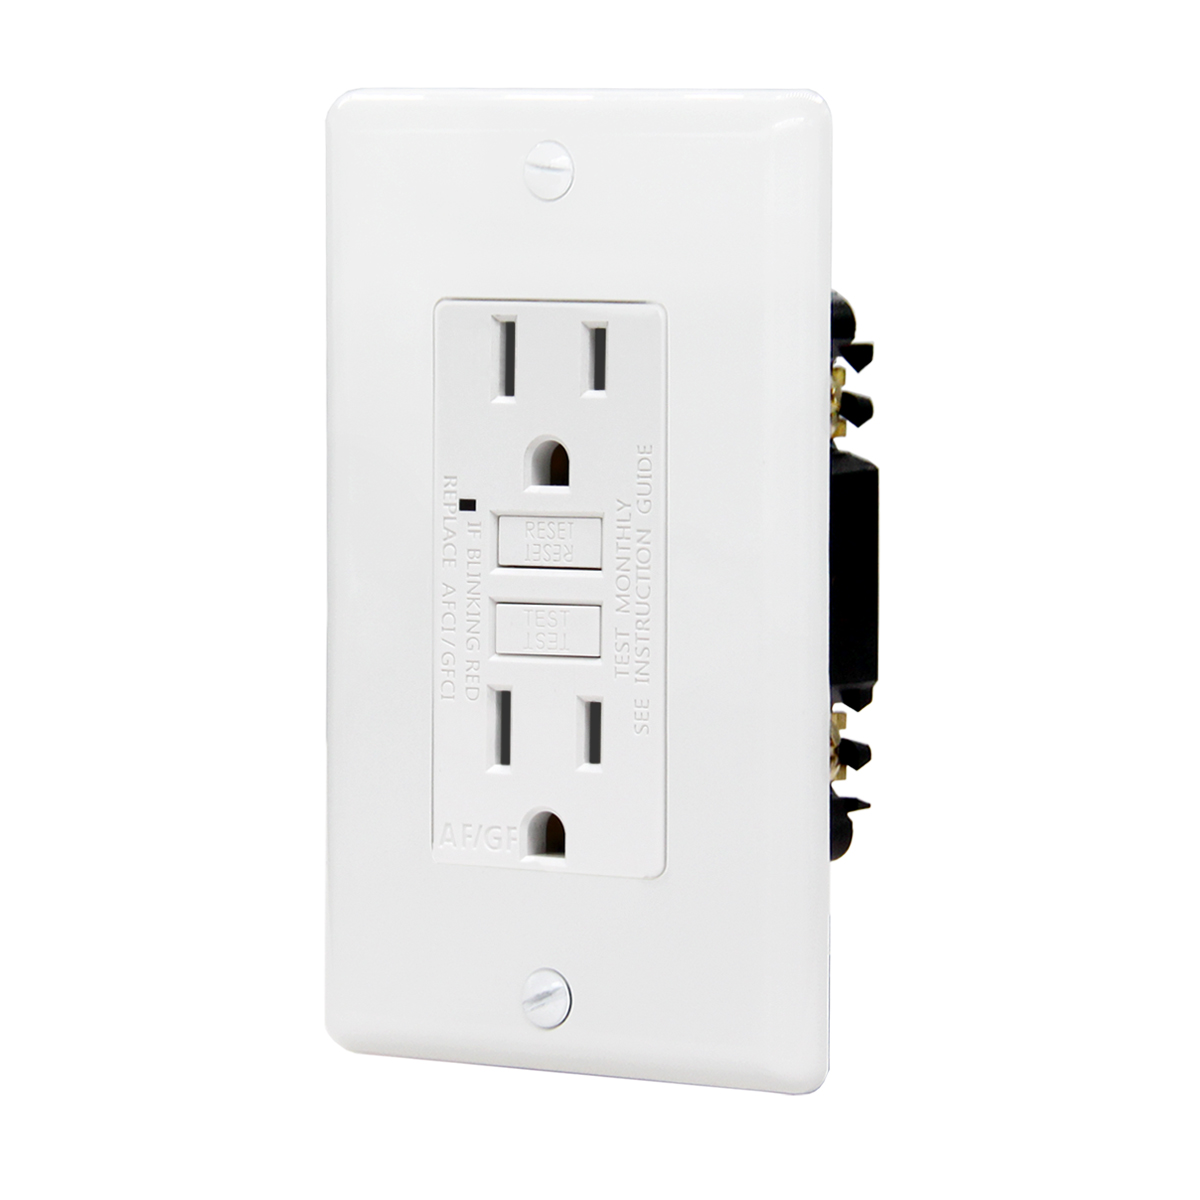 UL Listed New Arrival Self-Test 15 Amp/125V Dual Function AFCI/GFCI Receptacle, GLA-15A